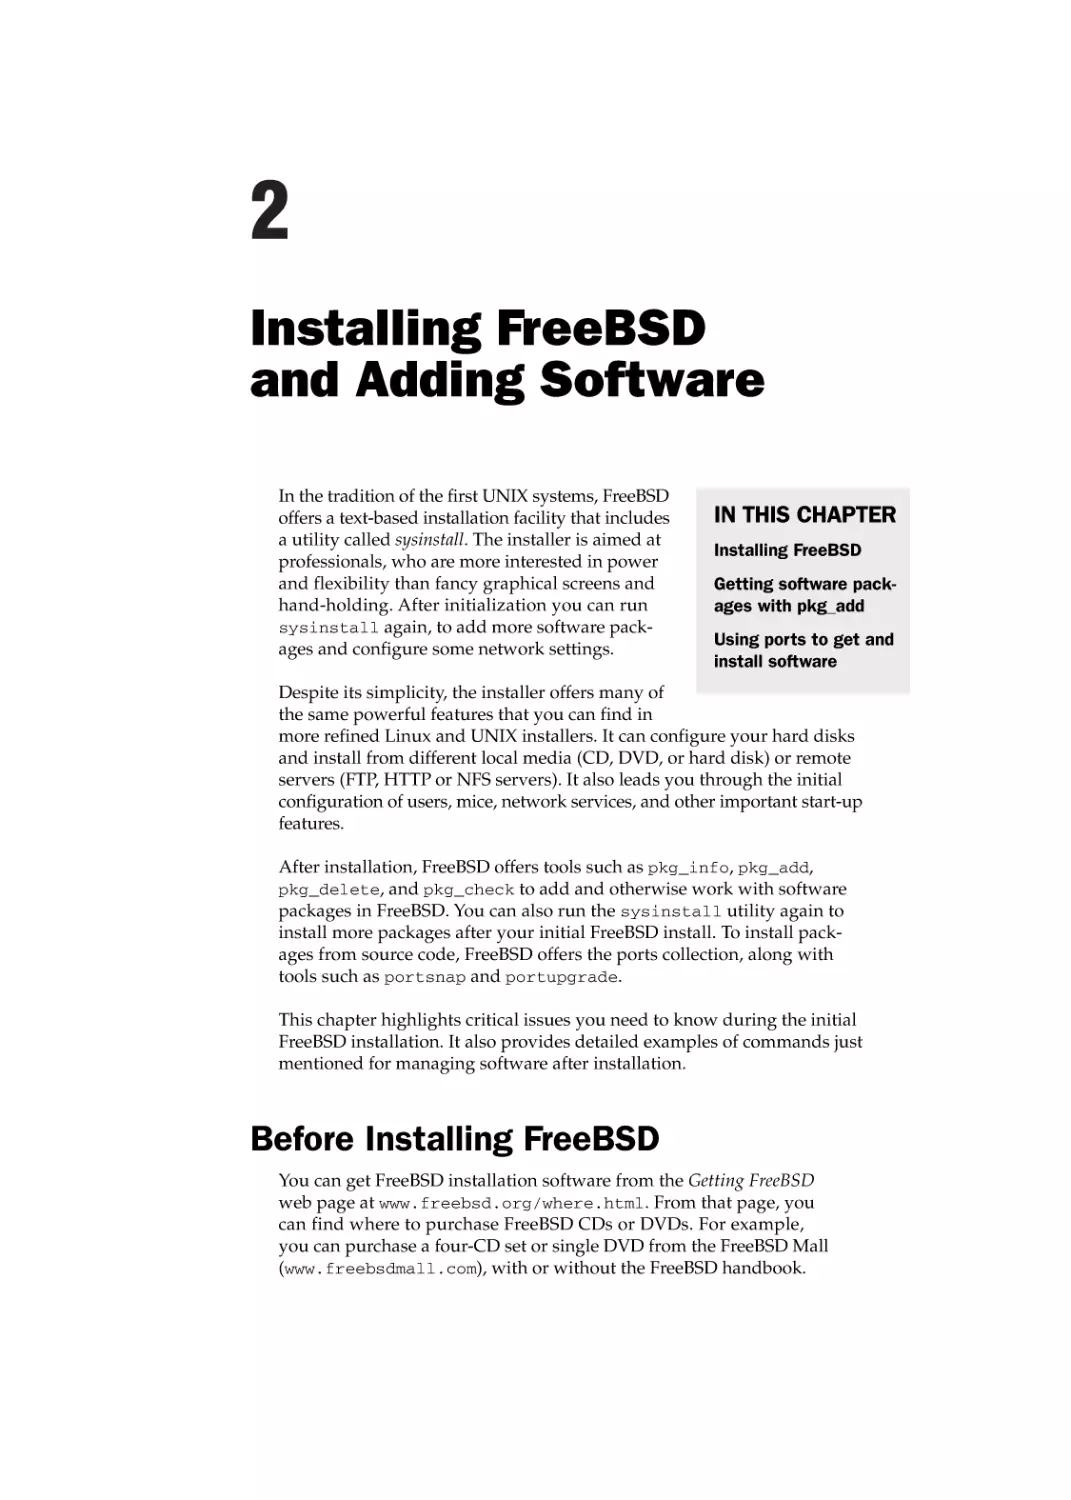 Chapter 2
Before Installing FreeBSD